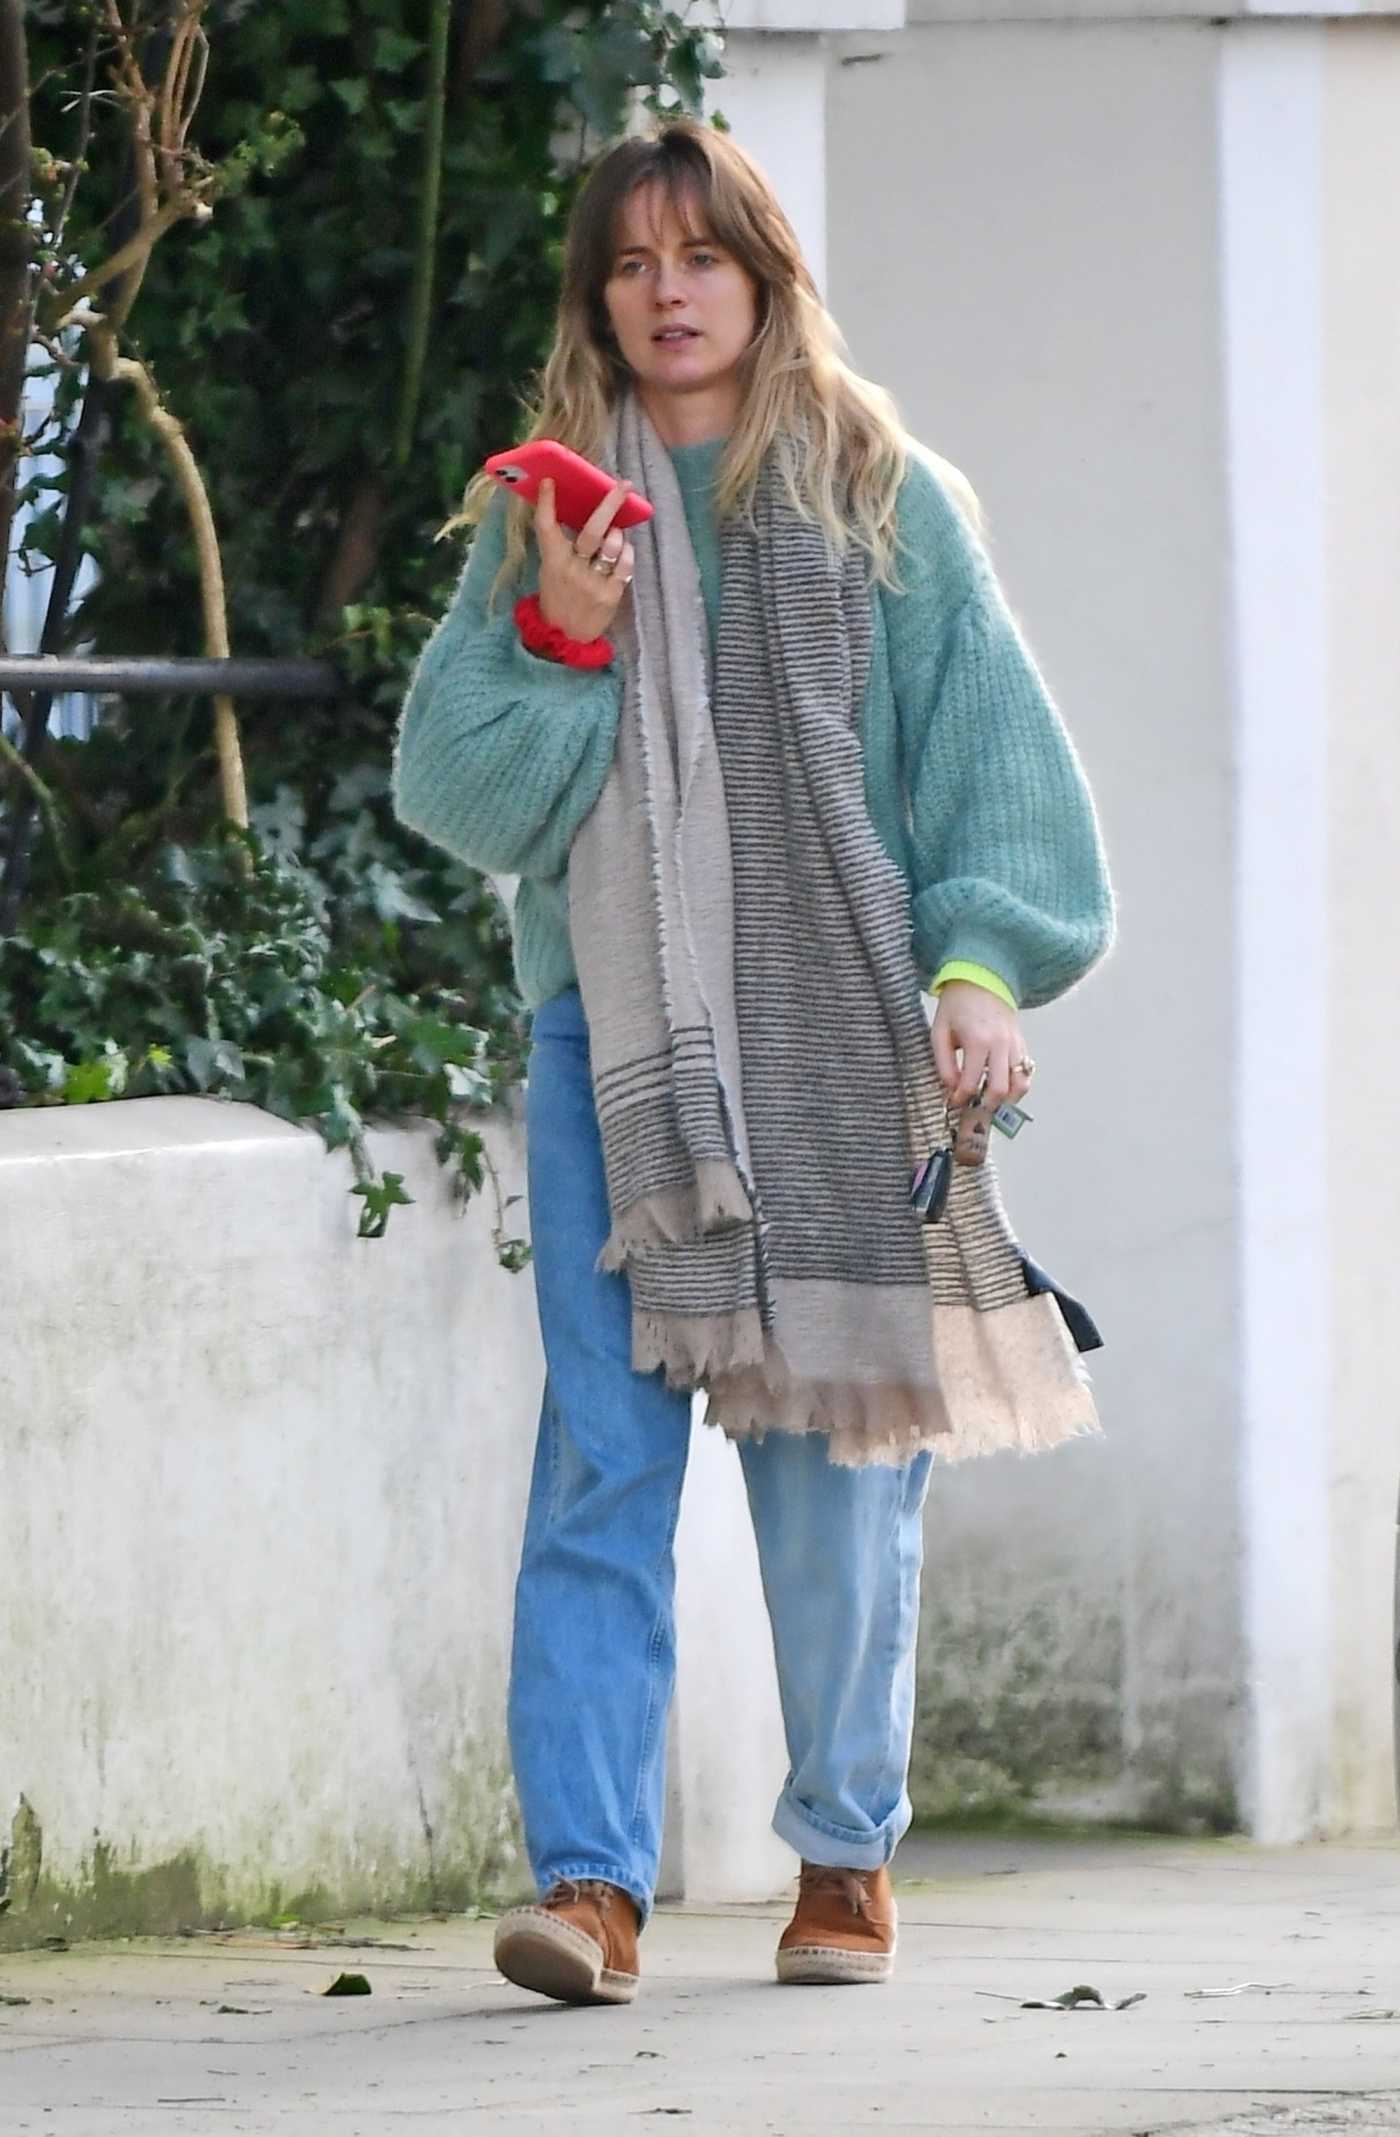 Cressida Bonas in a Sea-Green Sweater Was Seen Out in Notting Hill 02/20/2021